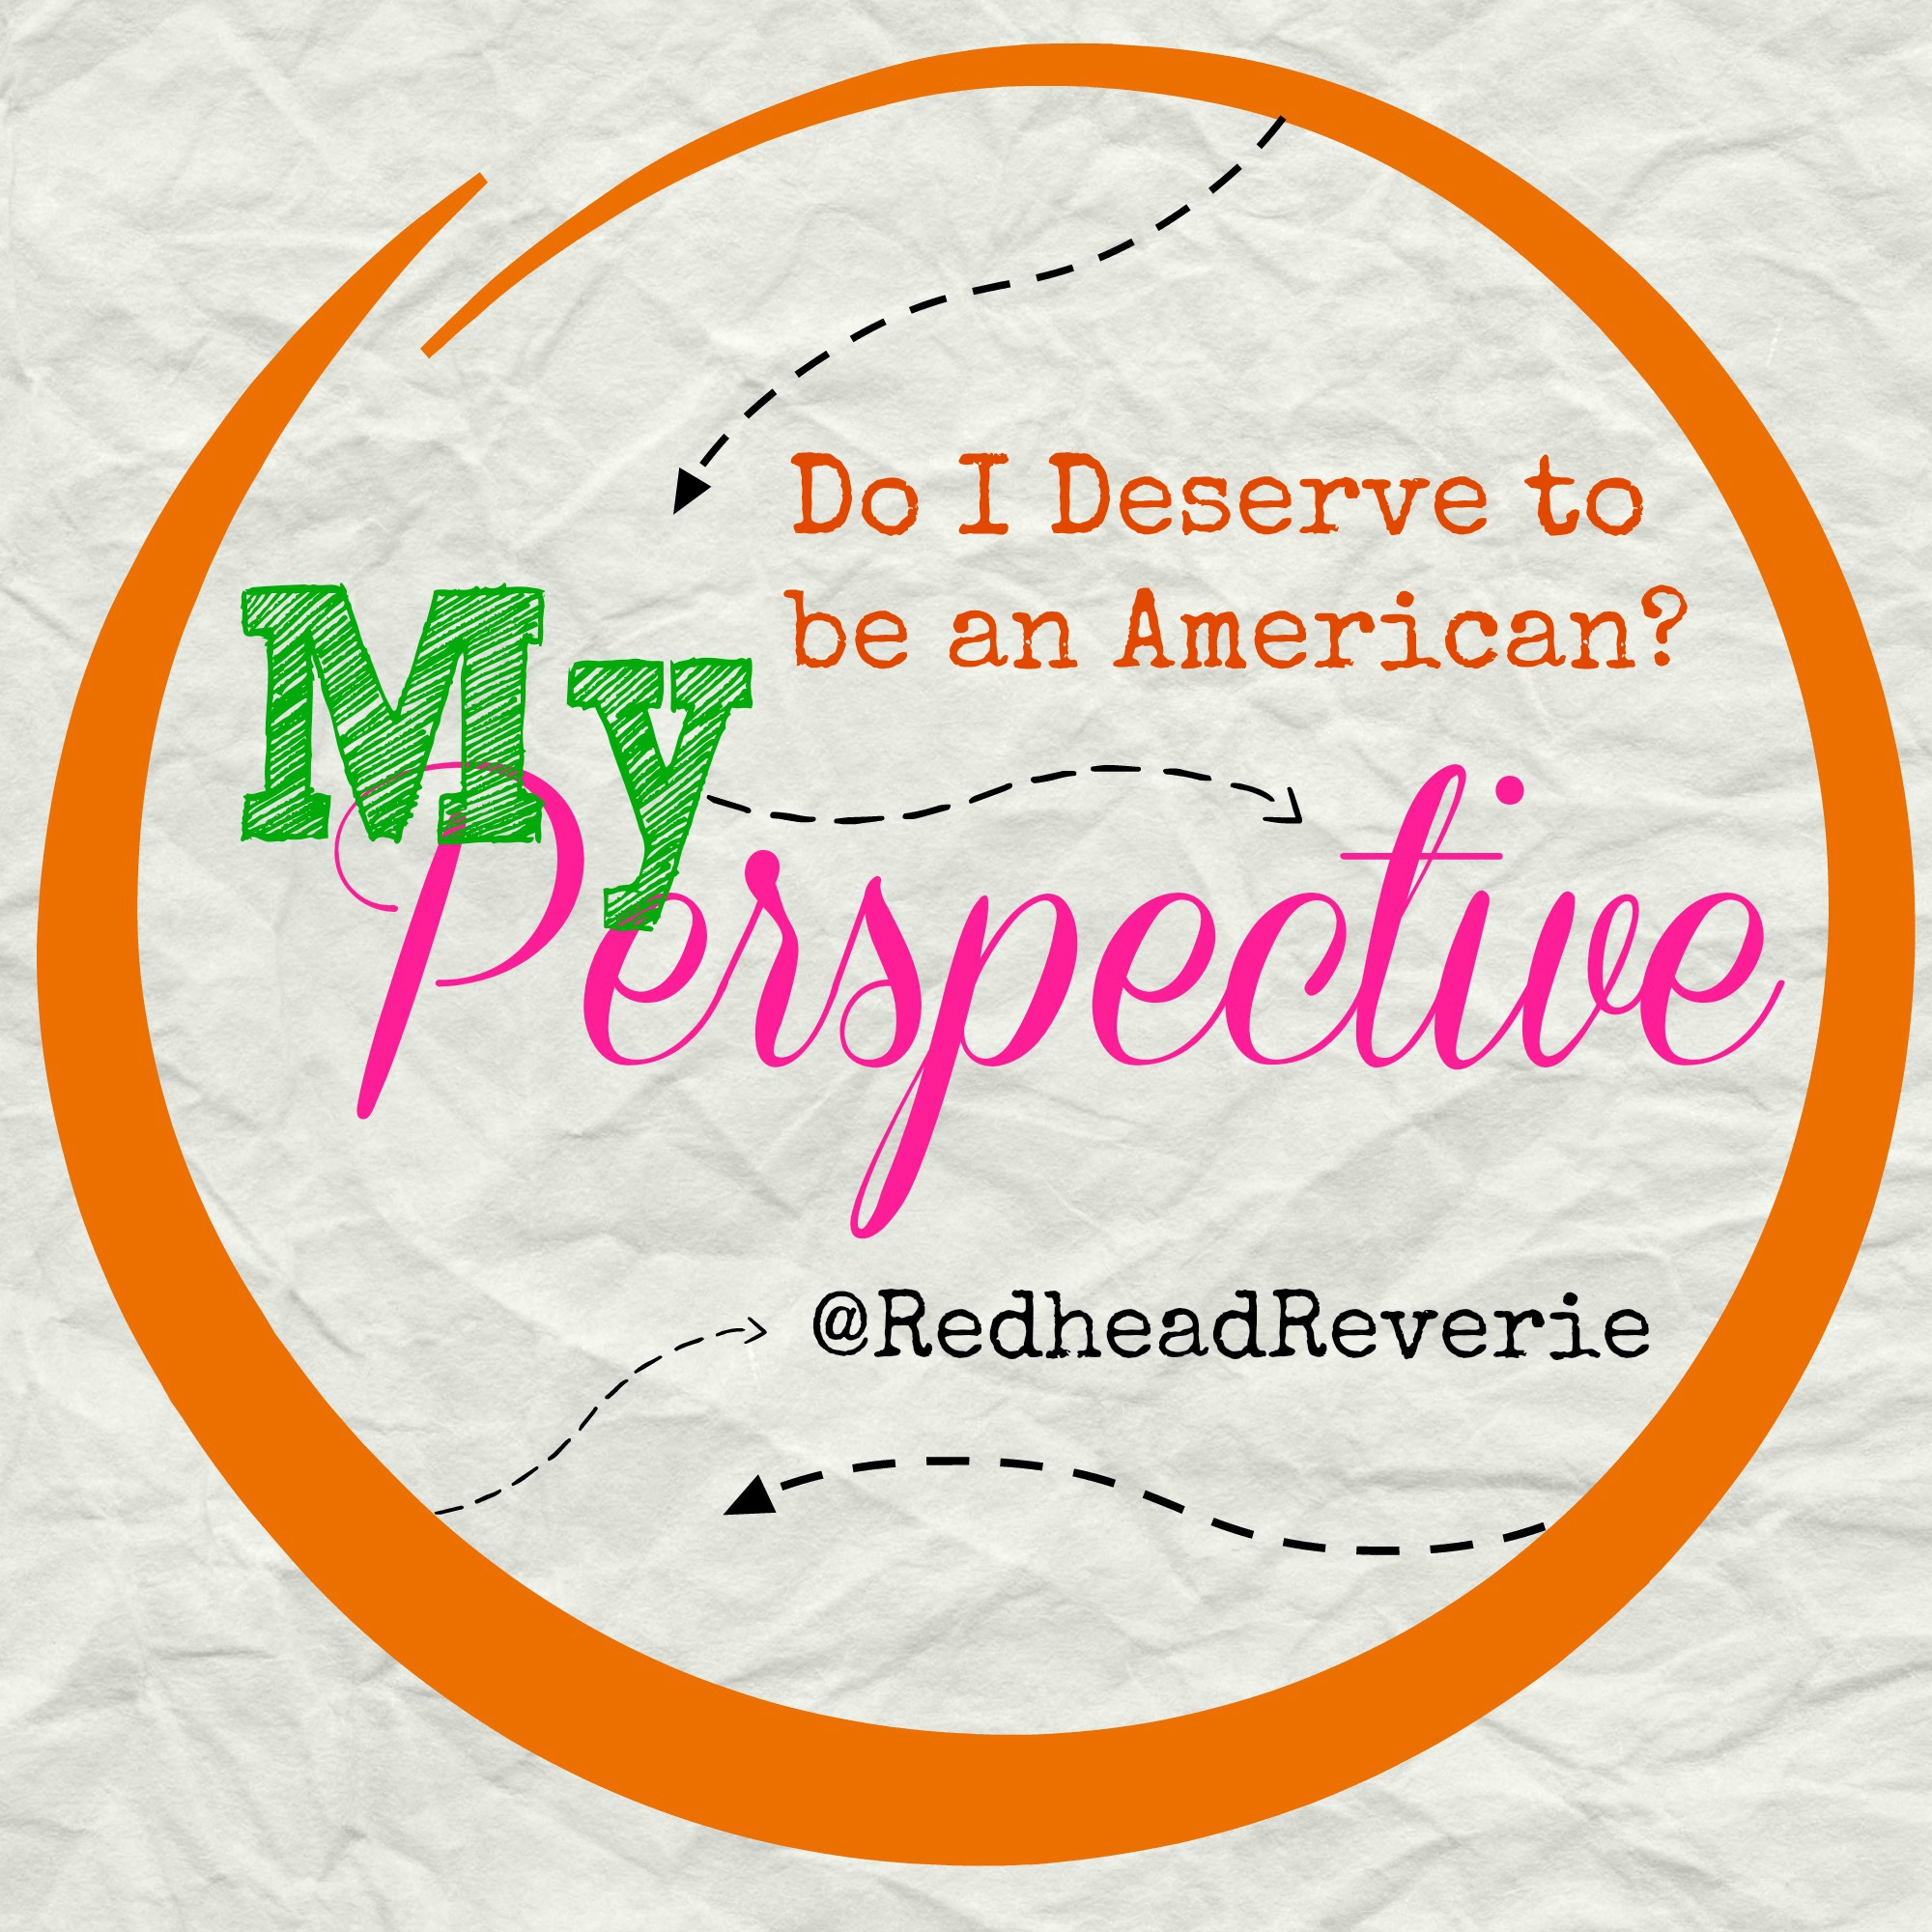 My Perspective: Do I Deserve to be an American?